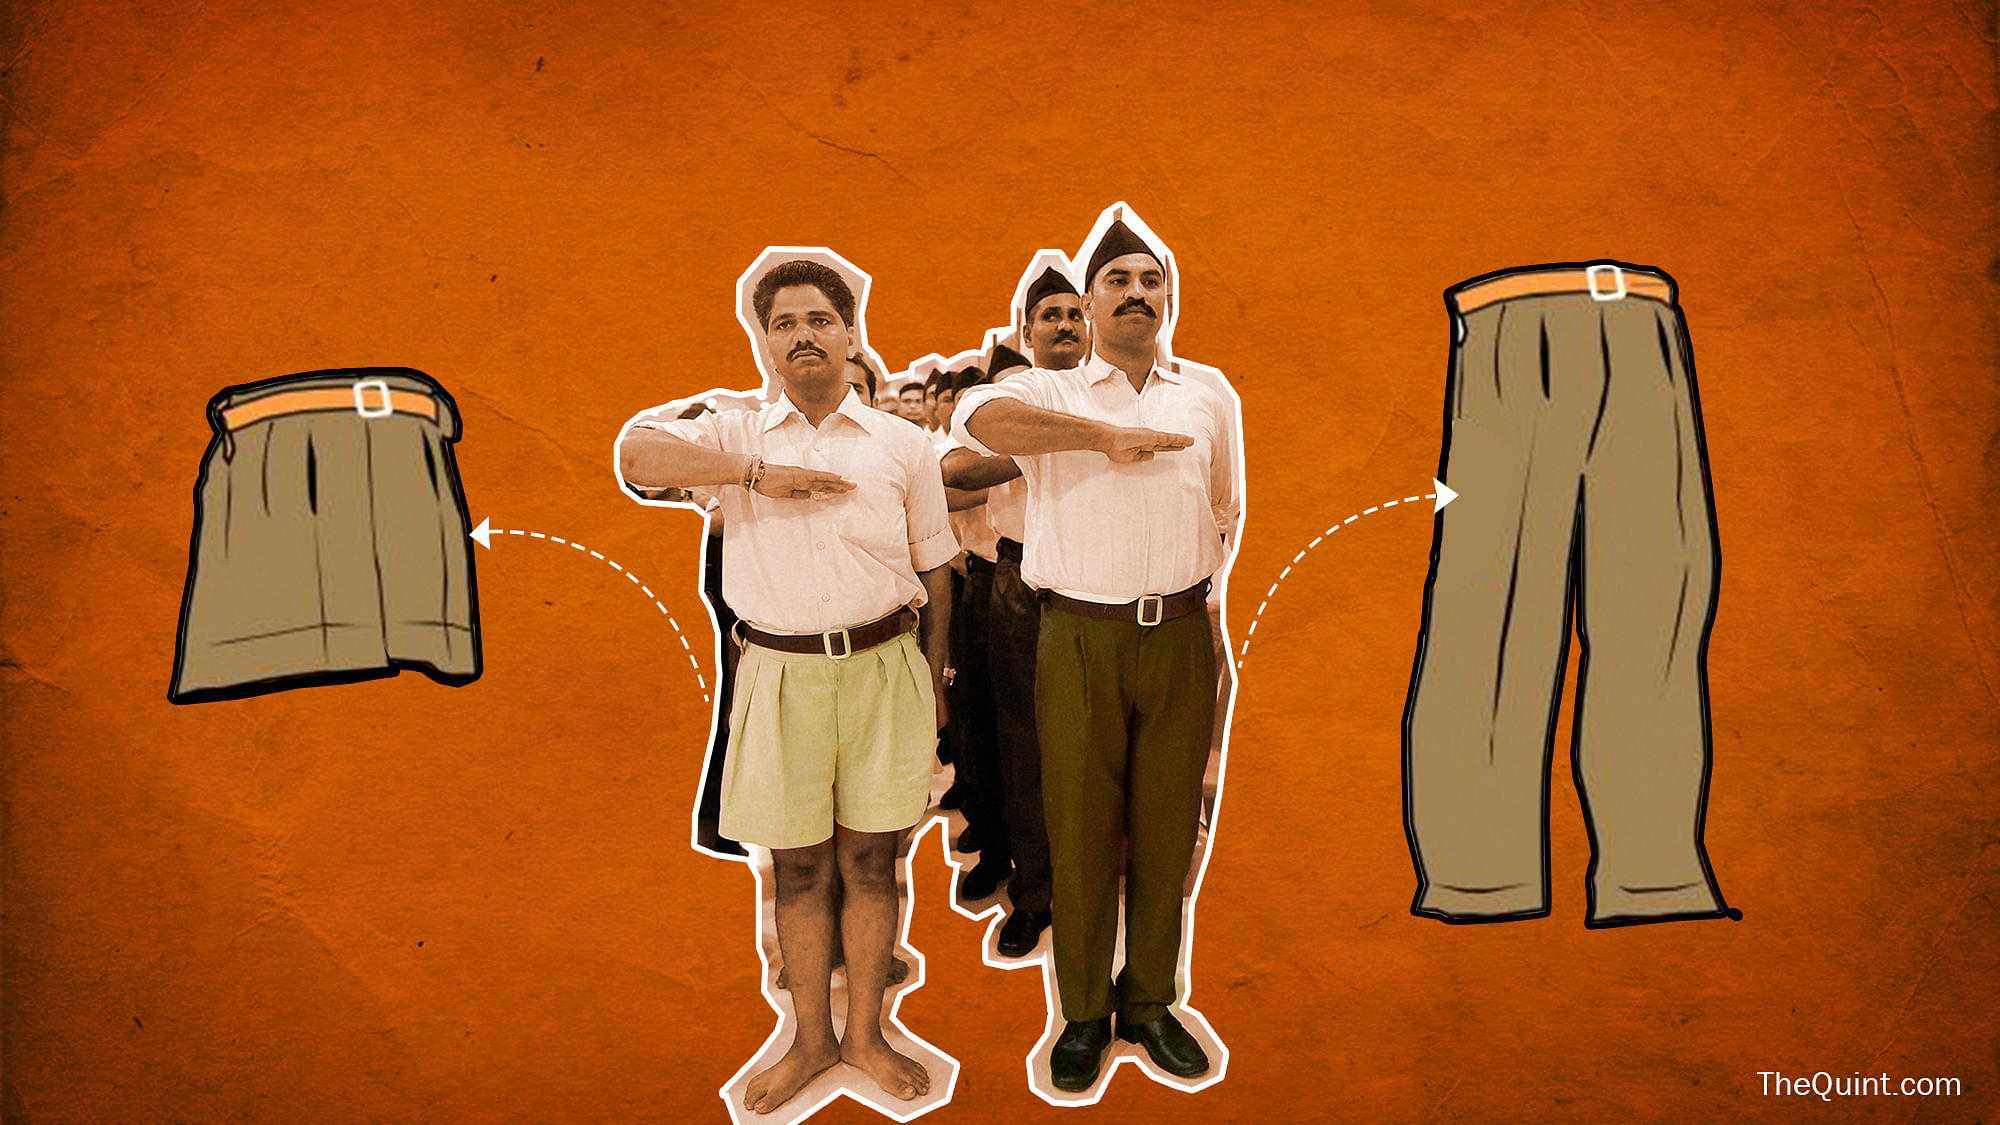 

RSS volunteers wear trousers, part of their new code, during a meeting in Bhopal, 4 September, 2016. (Photo: Lijumol Joseph/<b>The Quint</b>)